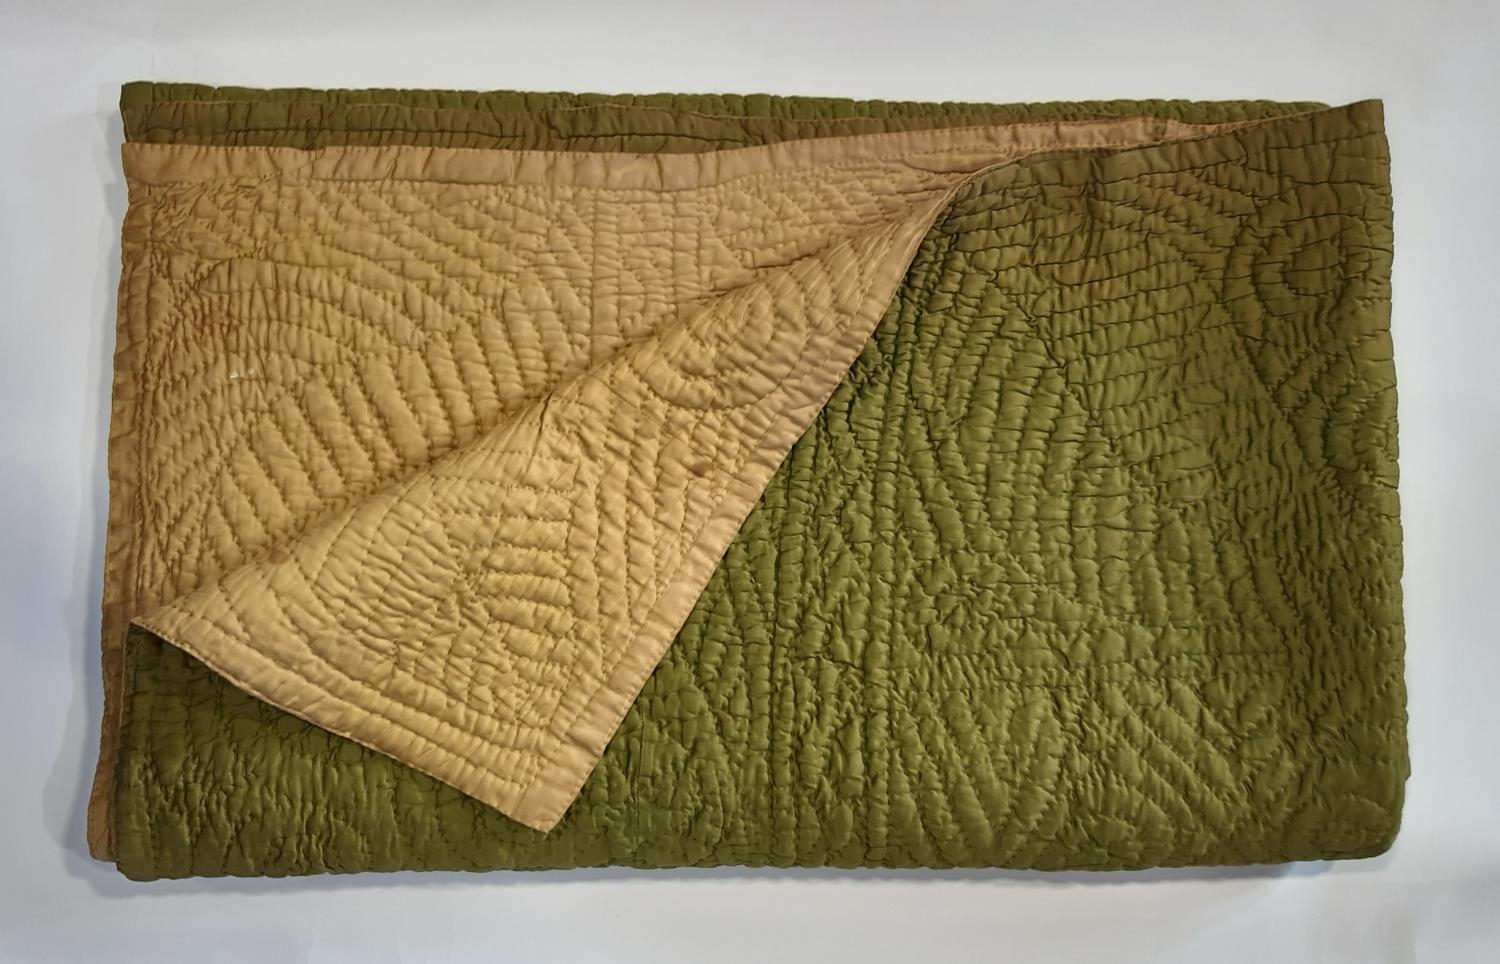 Hand stitched reversible vintage bed quilt in olive and dark gold colours, quilted in running